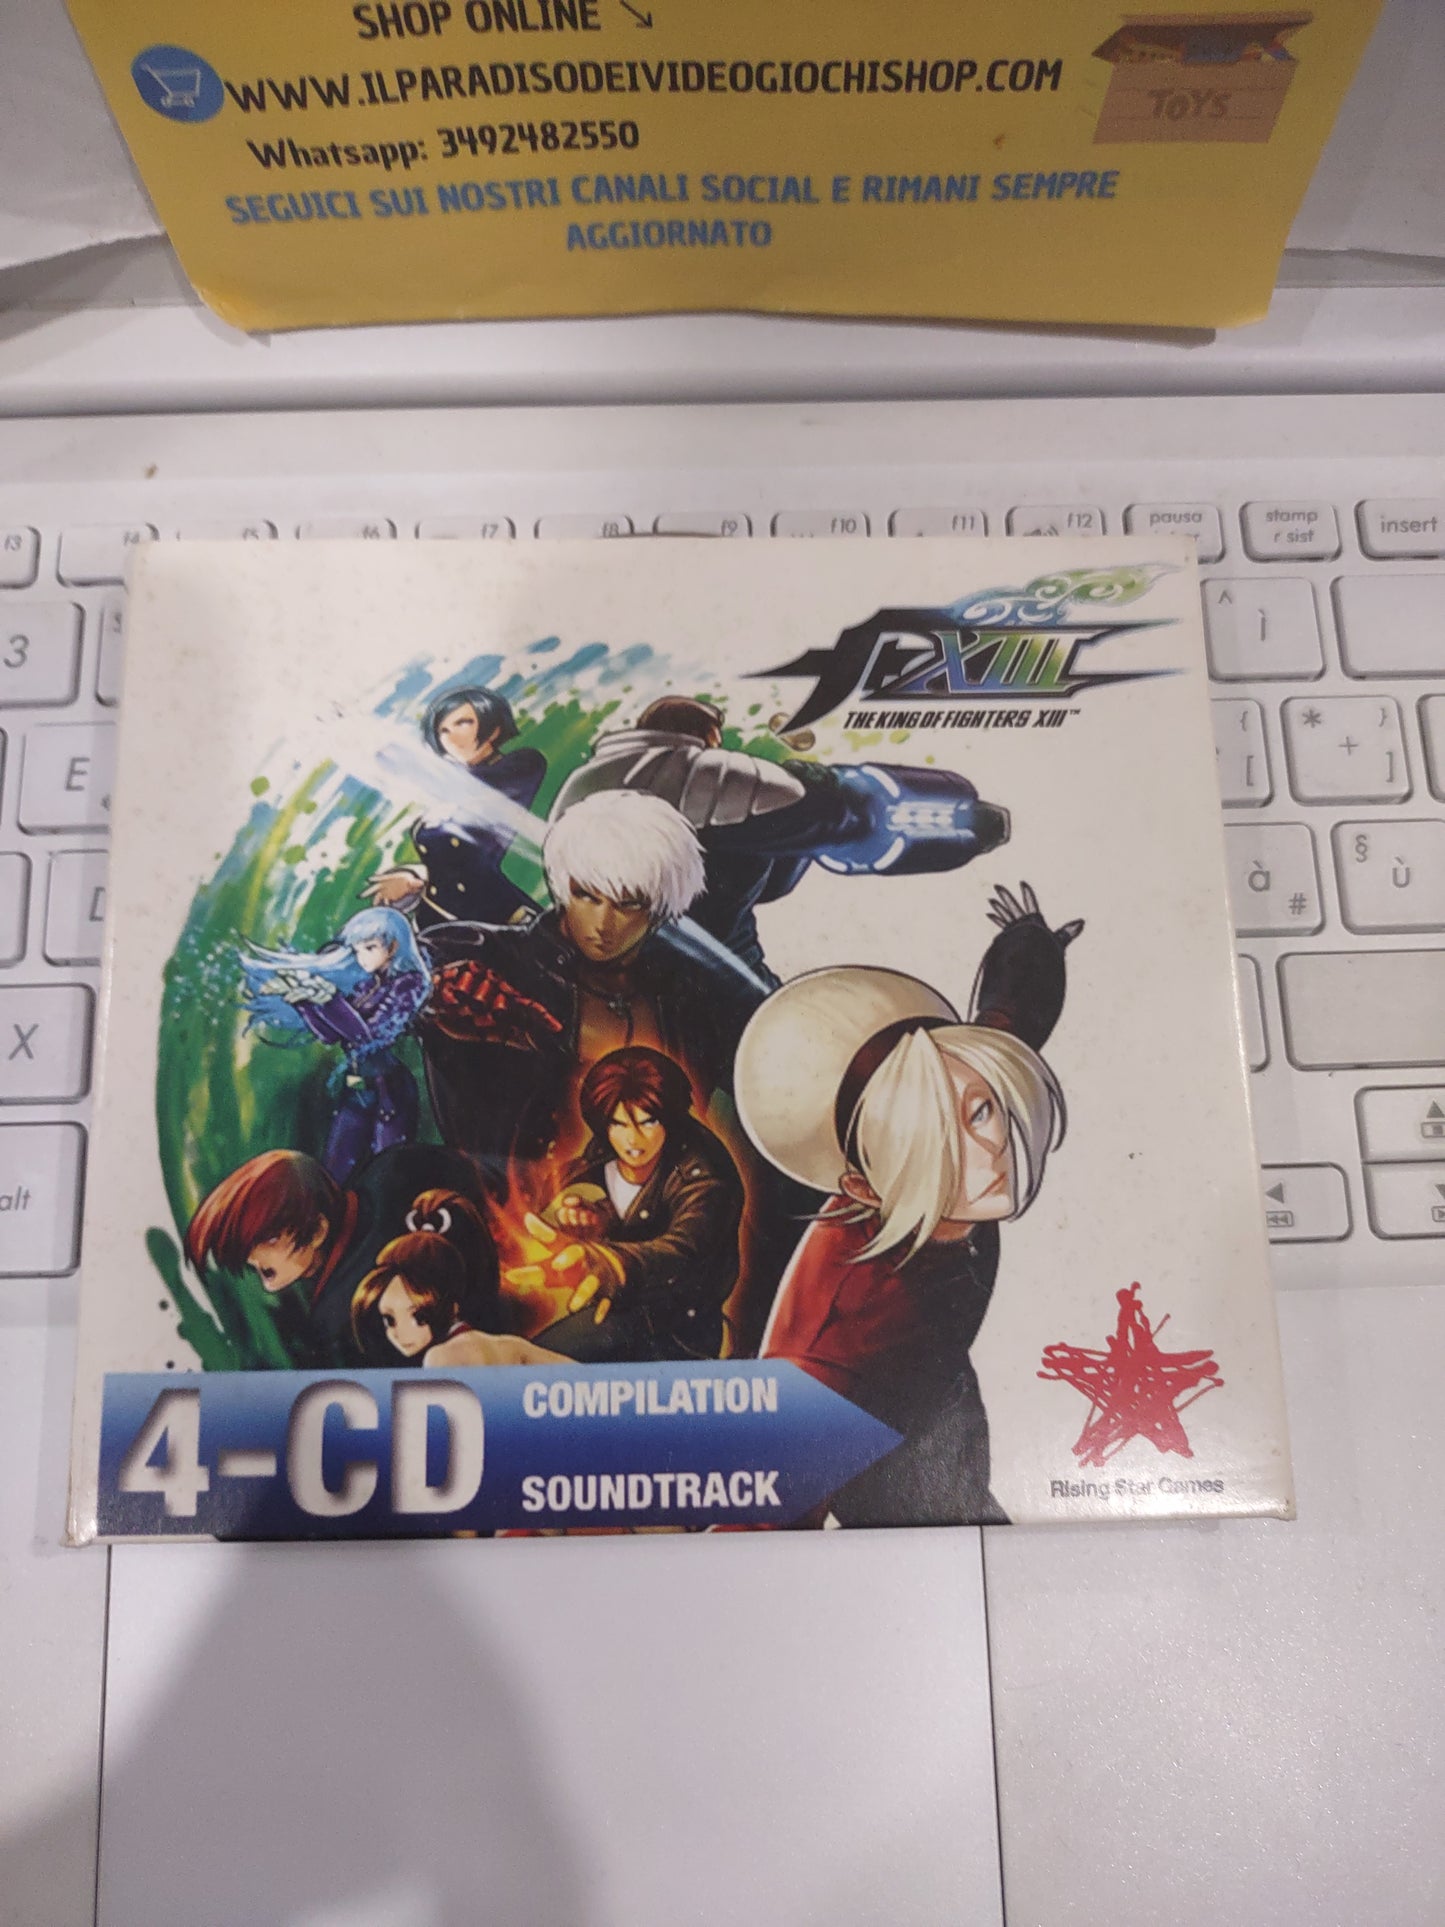 Compilation soundtrack 4 cd the King of fighters 13 XIII OST